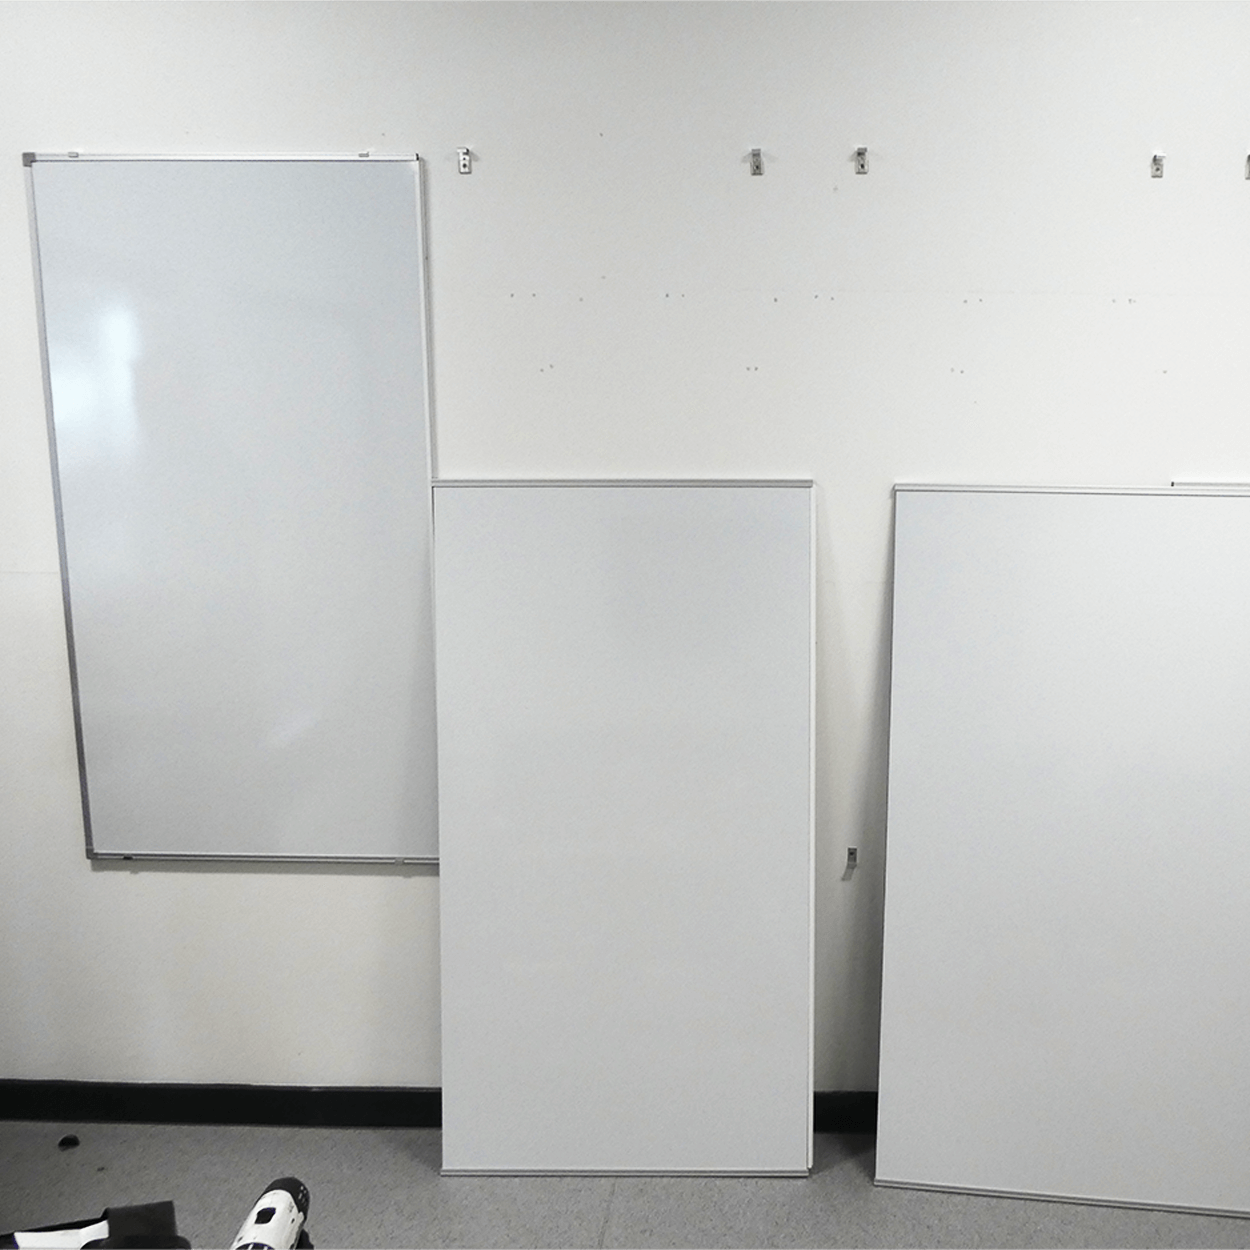 How To: Create a Large Magnetic Whiteboard Wall, Newsroom